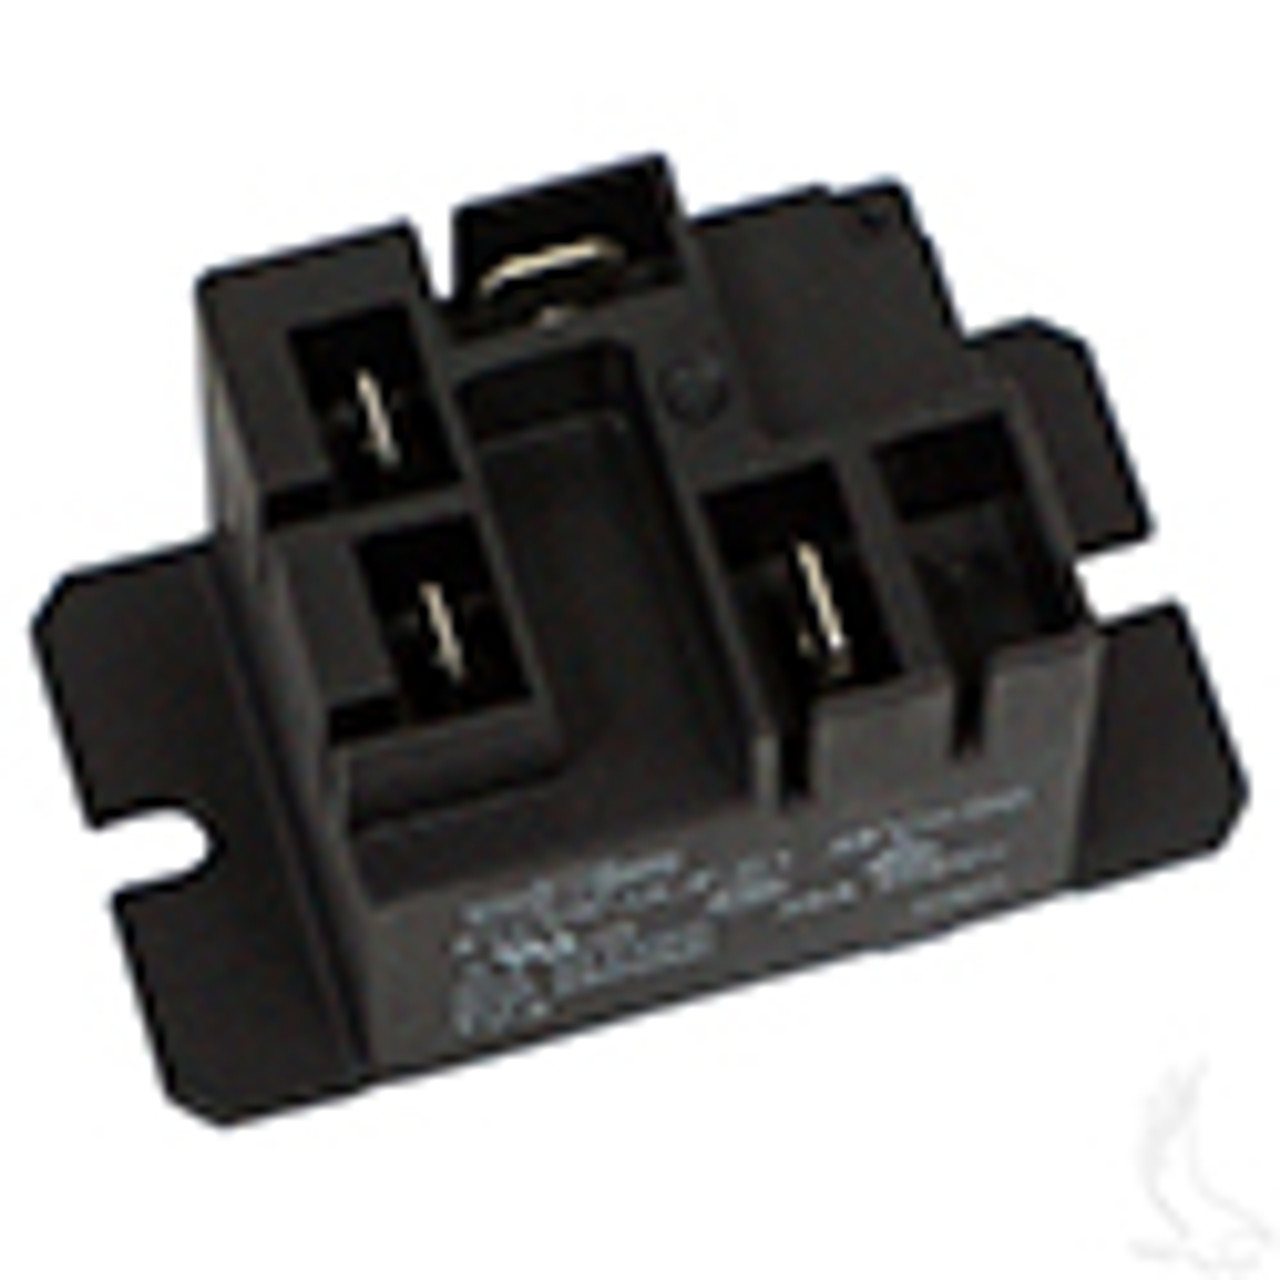 48V Relay for Club Car PowerDrive Chargers 1995-Up, CGR-073, 101828601, 3551, 3551A, 4436. CGR-073